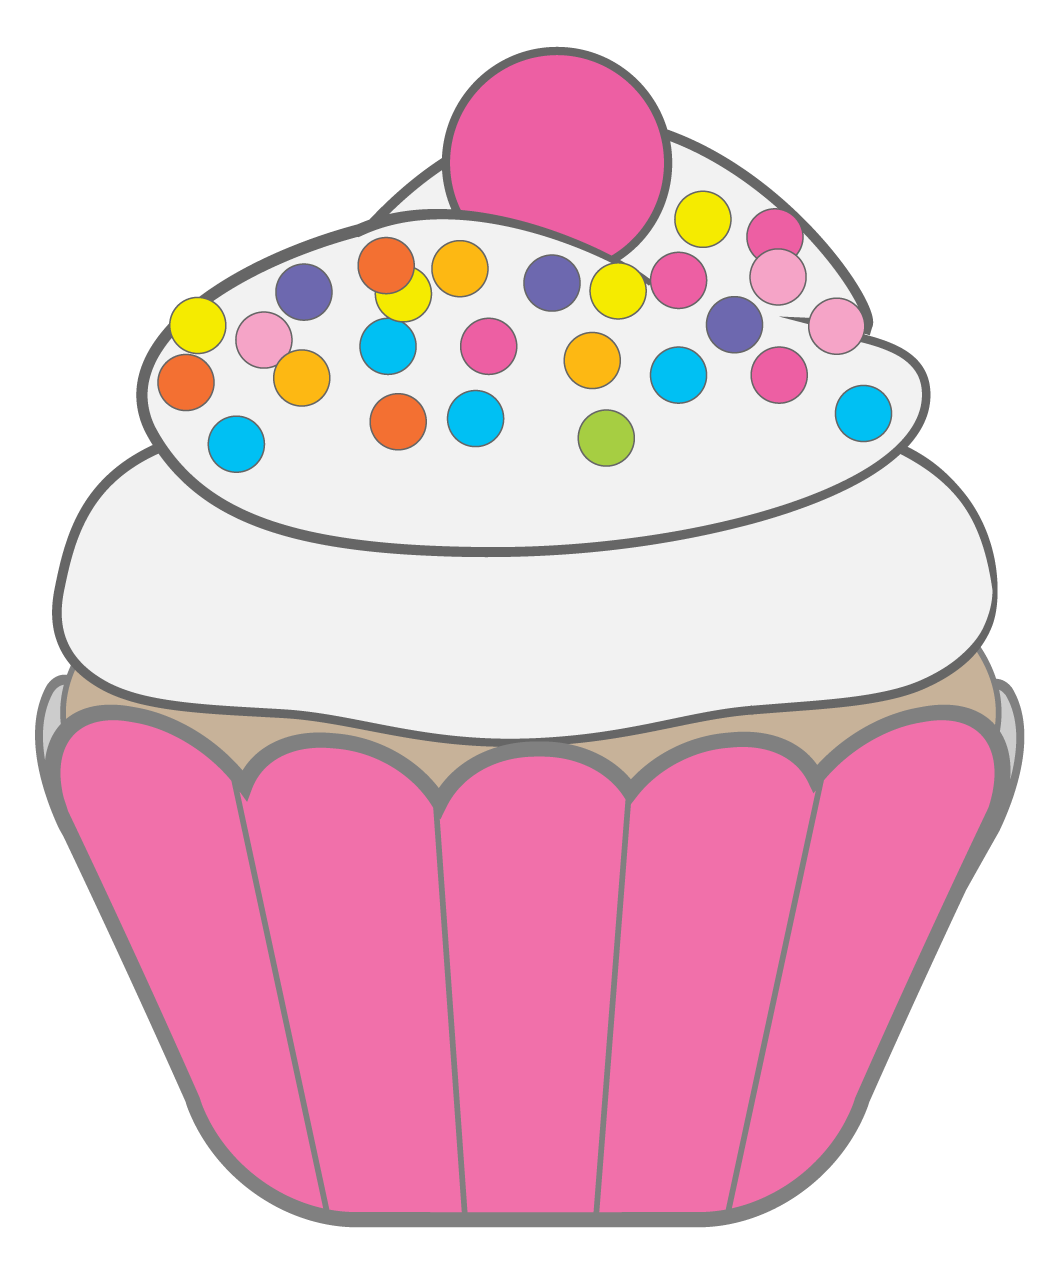 Cupcakes clipart cupcake logo. Muffins by carol smith